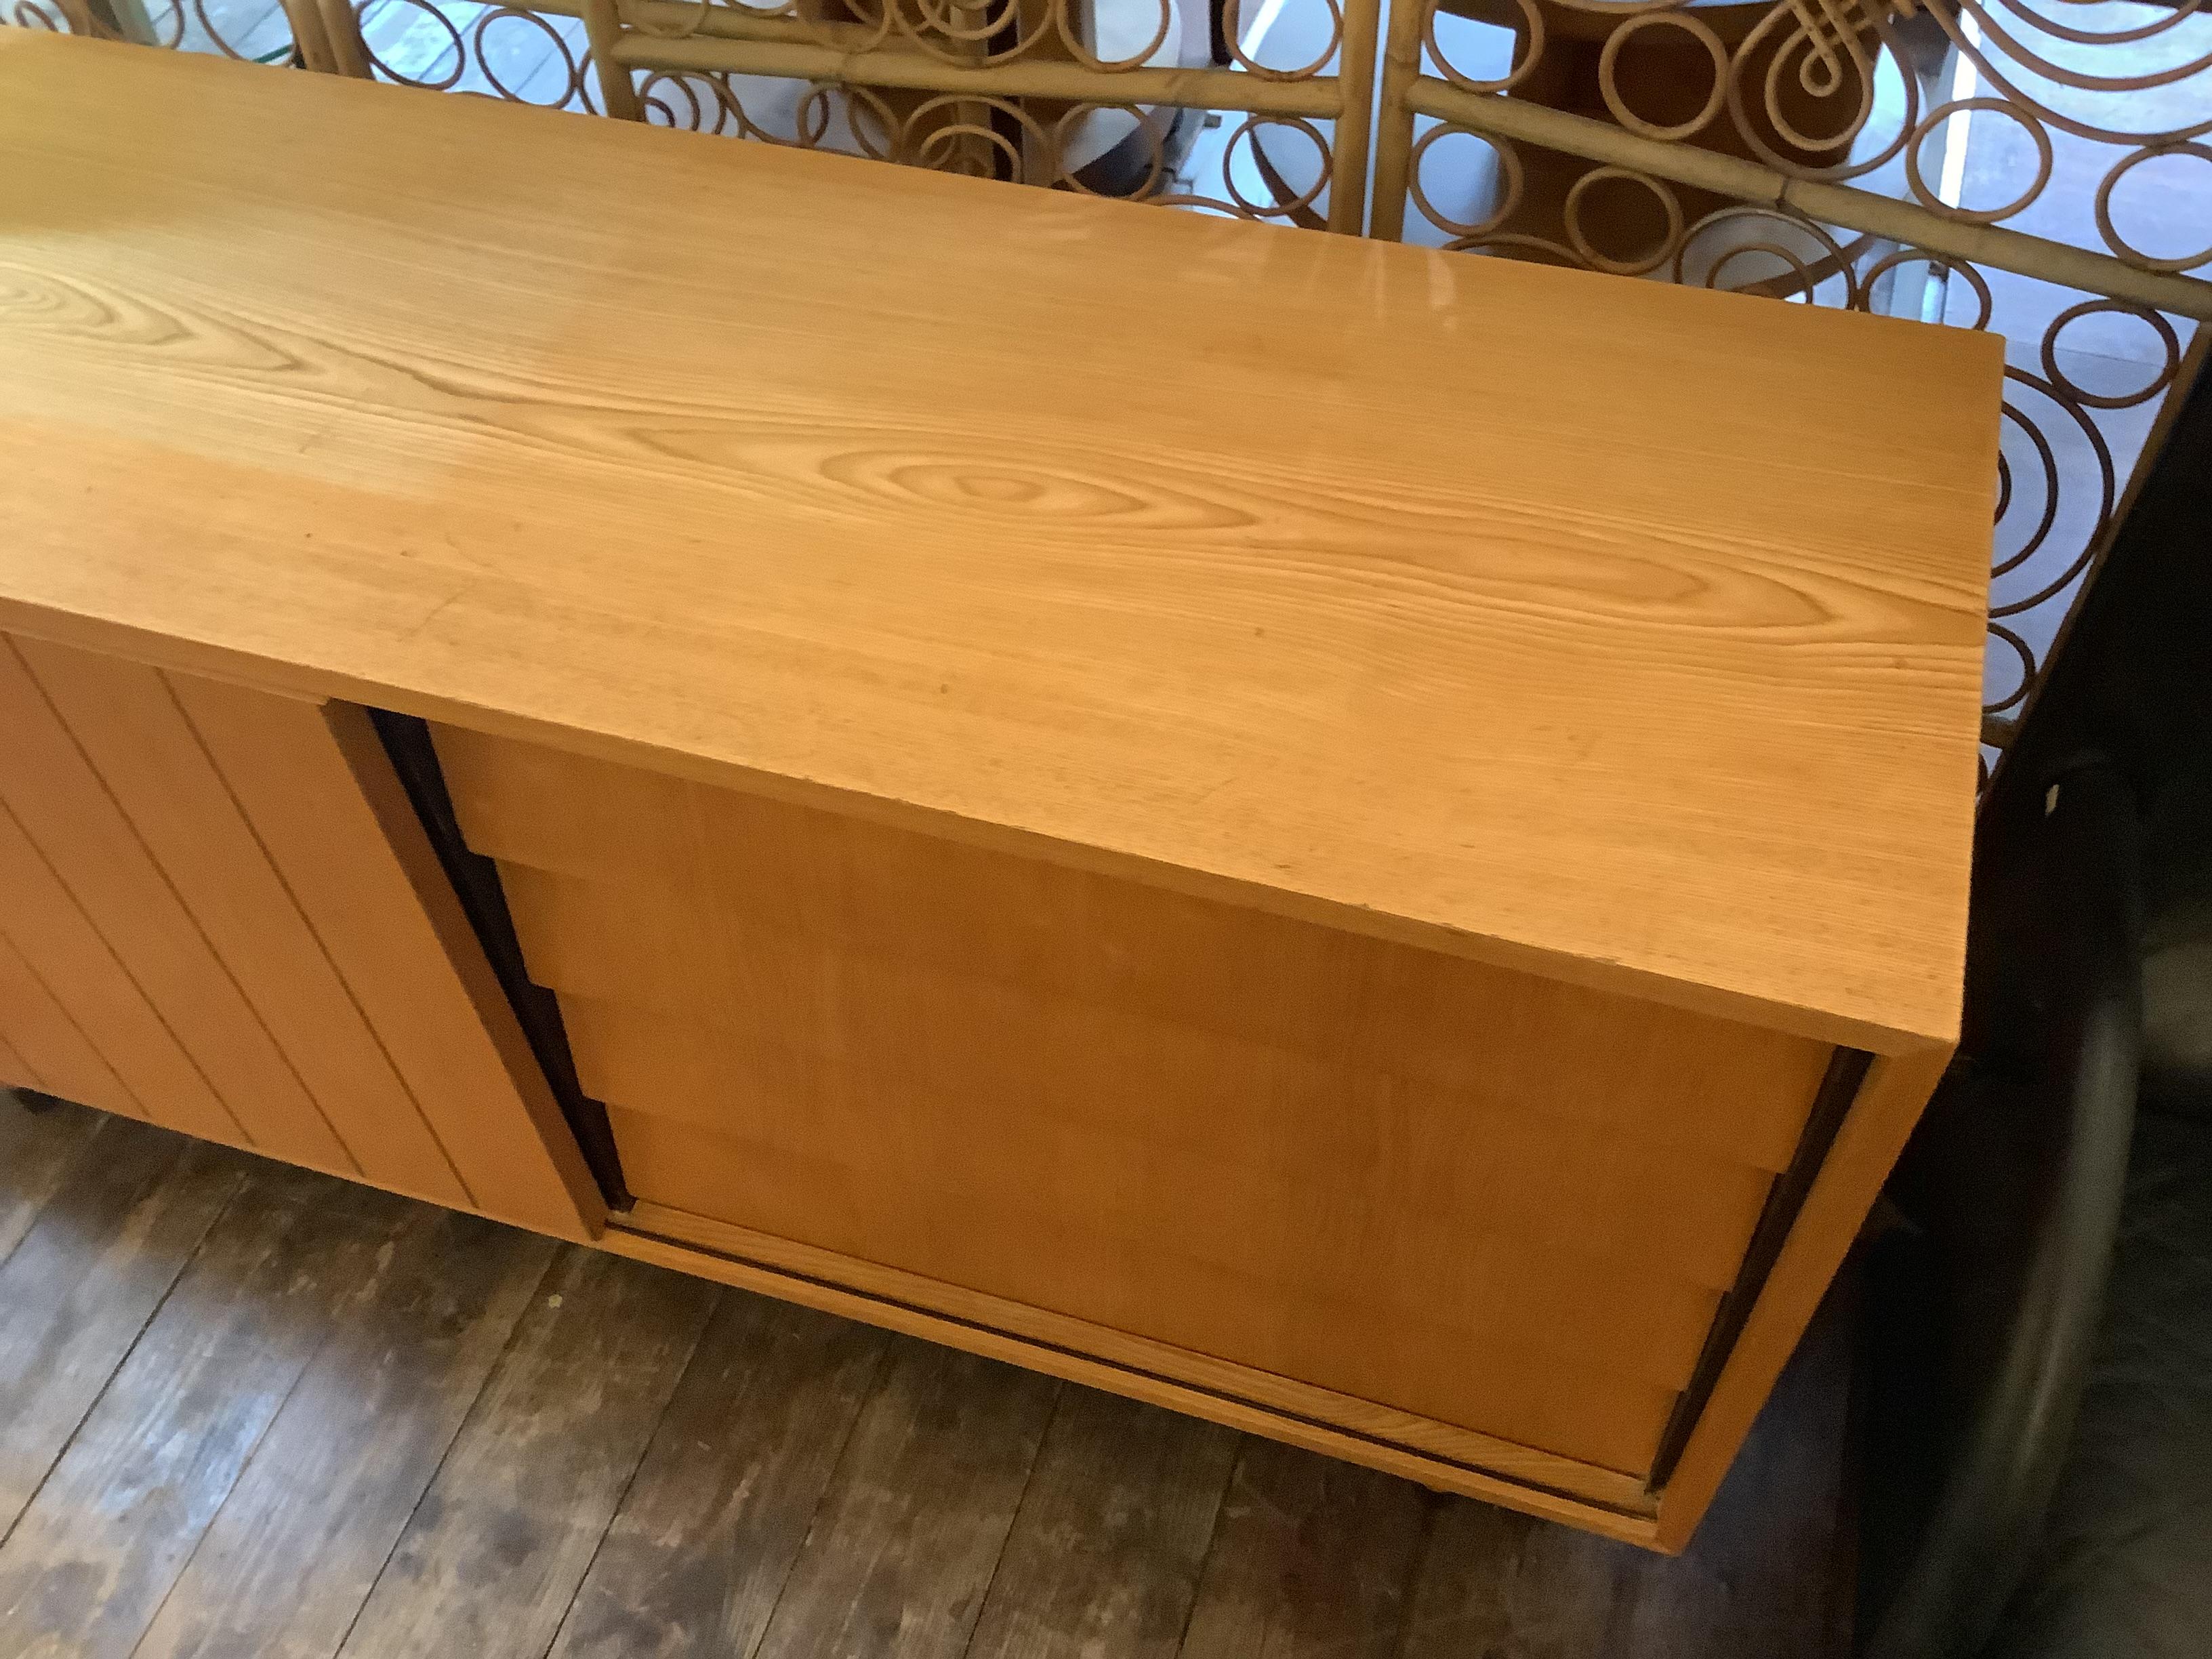 1950s sideboard by designed by Erich Stratmann In Good Condition For Sale In London, Lambeth